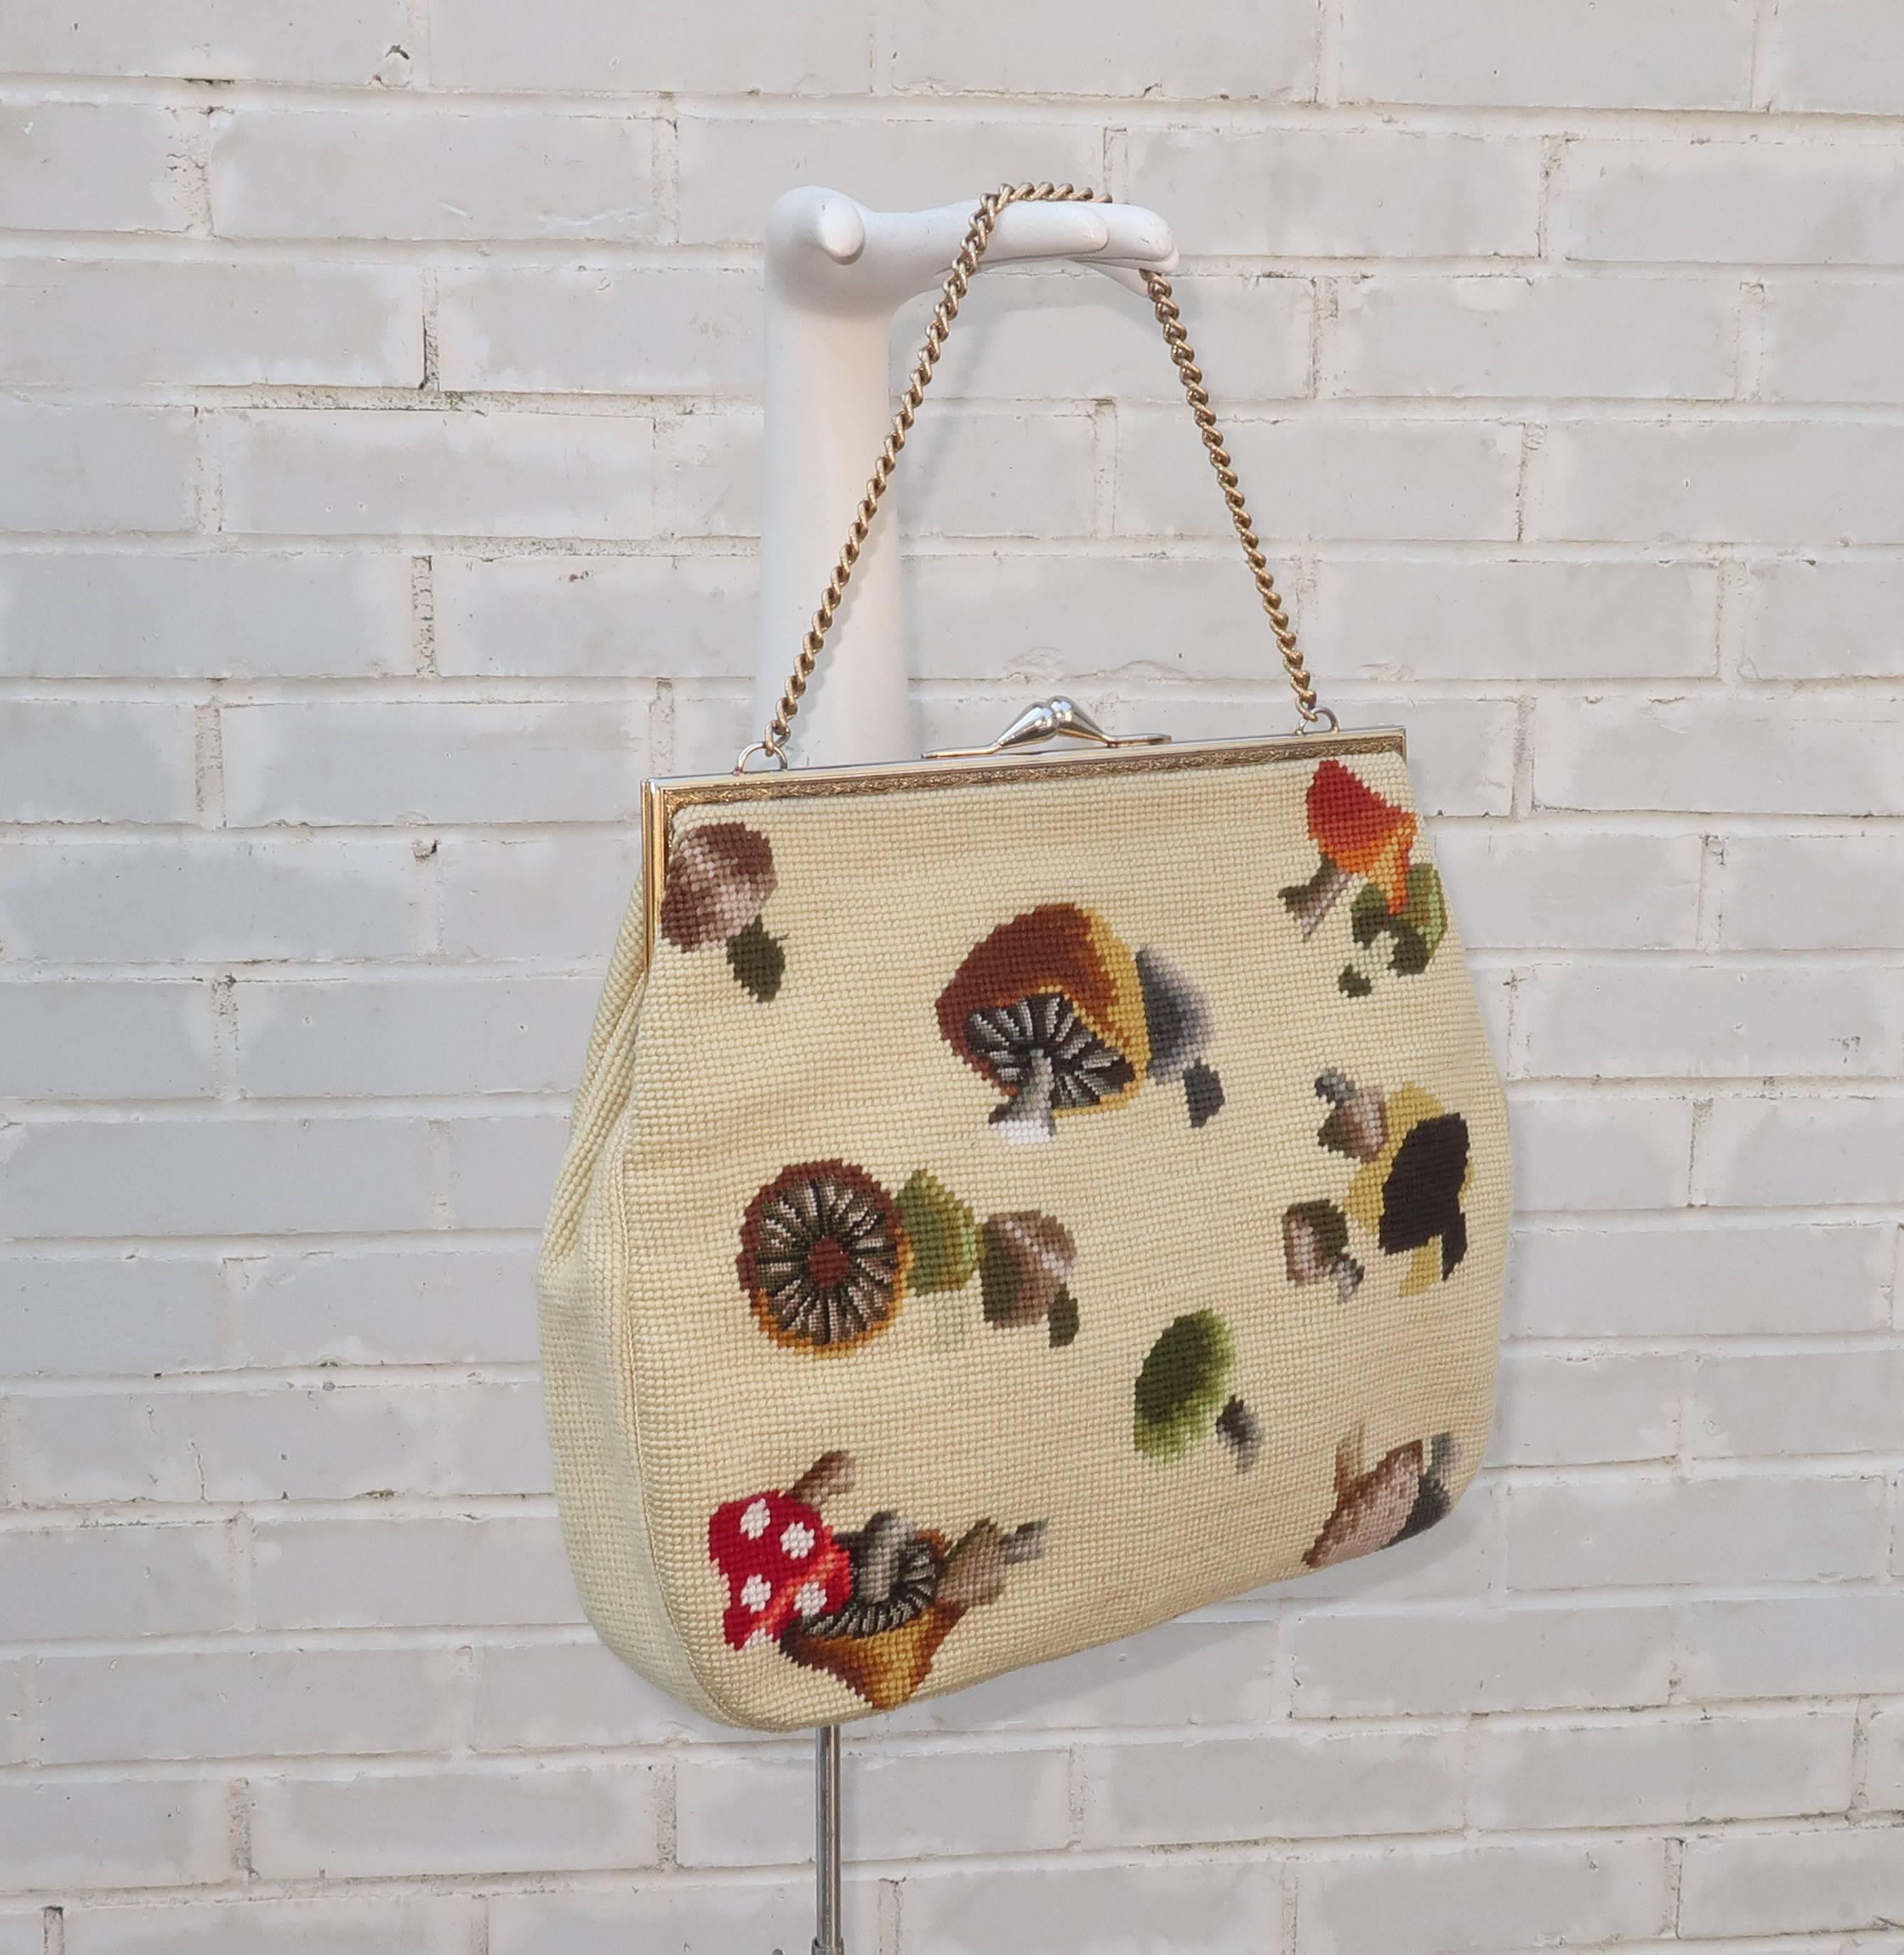 Not all 'granny bags' are created equal!  This C.1960 needlepoint example is at the front of the pack combining an extra large size with a delightful mushroom motif.  The body of the handbag measures 13.5